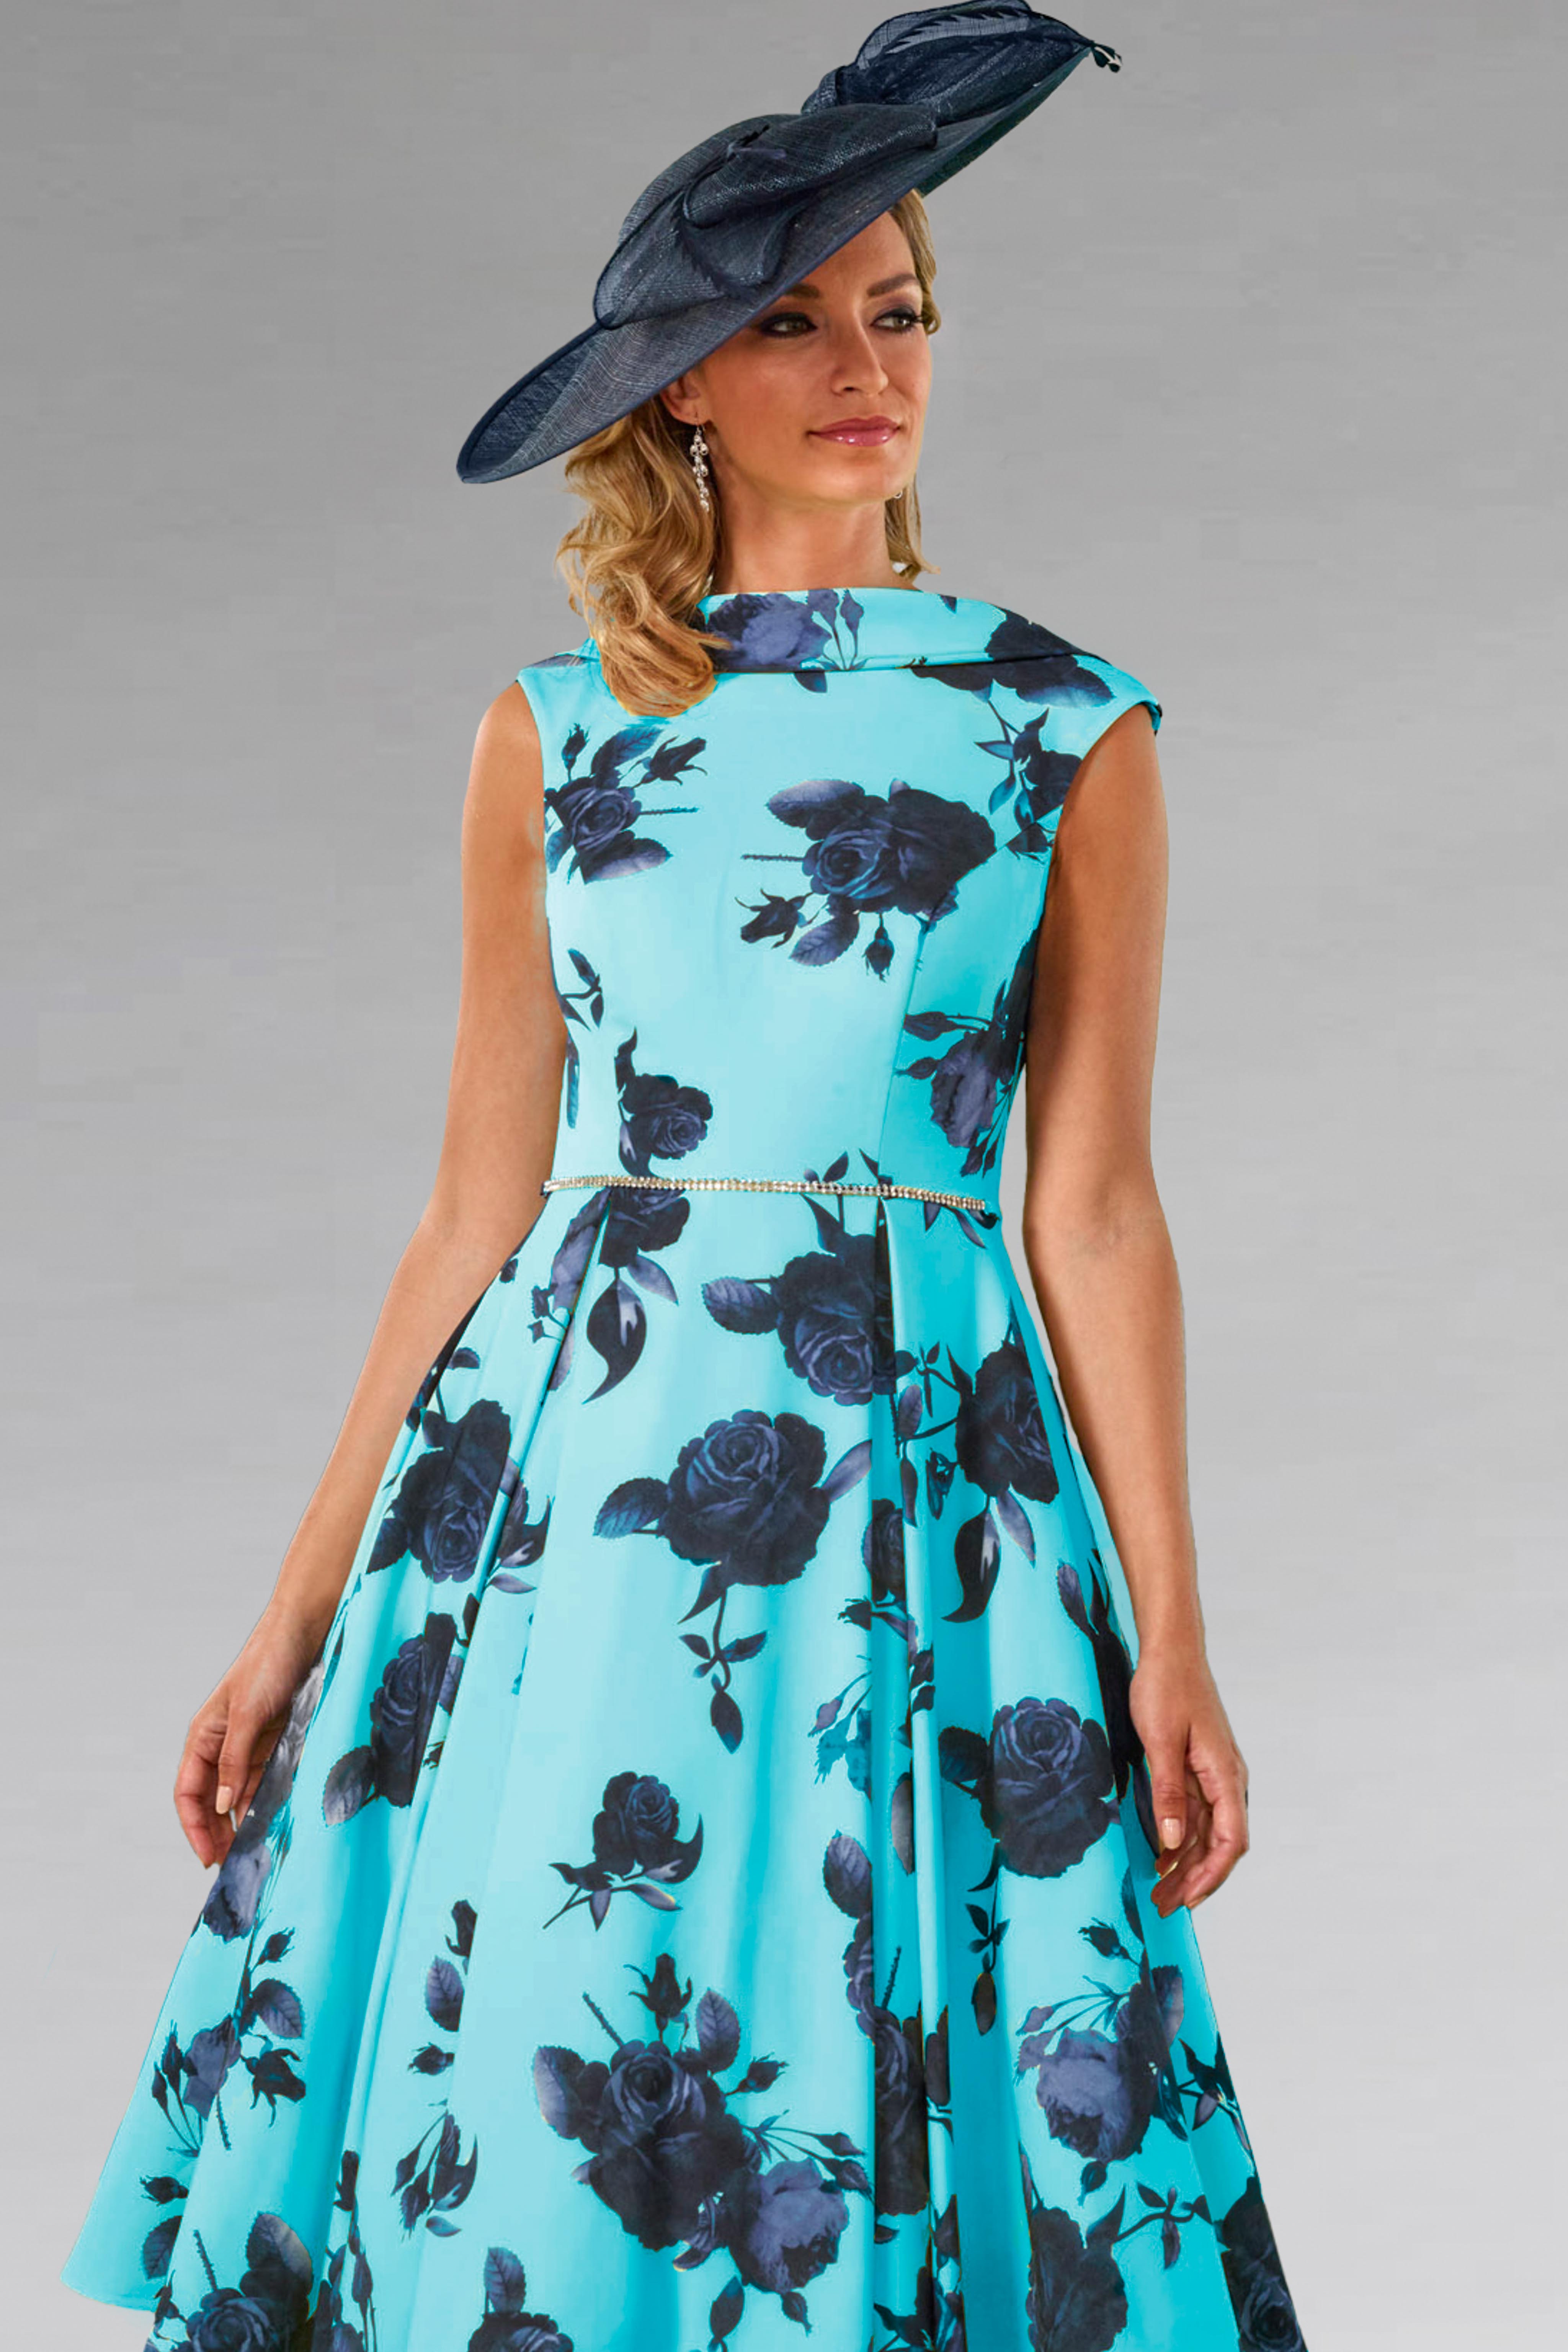 Short A Line Dress in Floral Print. VO3580 - Catherines of Partick